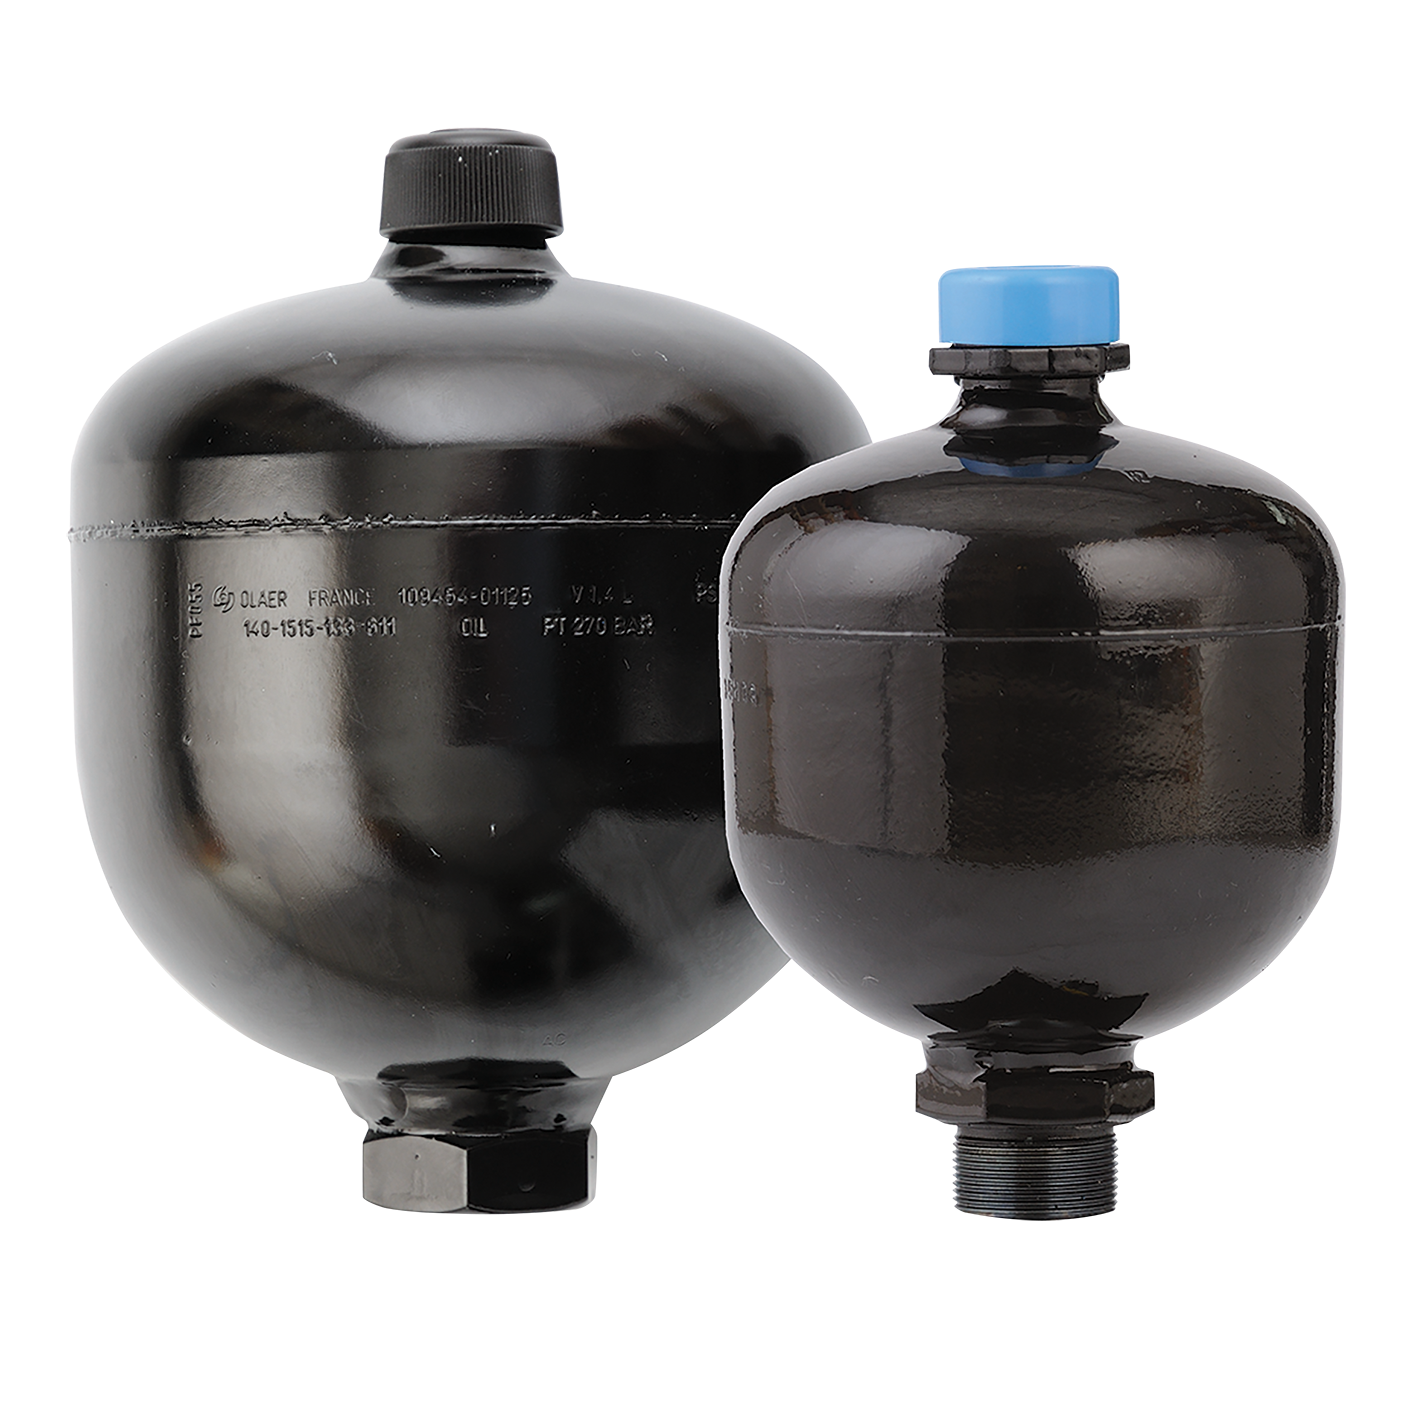 Providers of FCH DIAPHRAGM ACCUM 0.16 LITRES G1/2